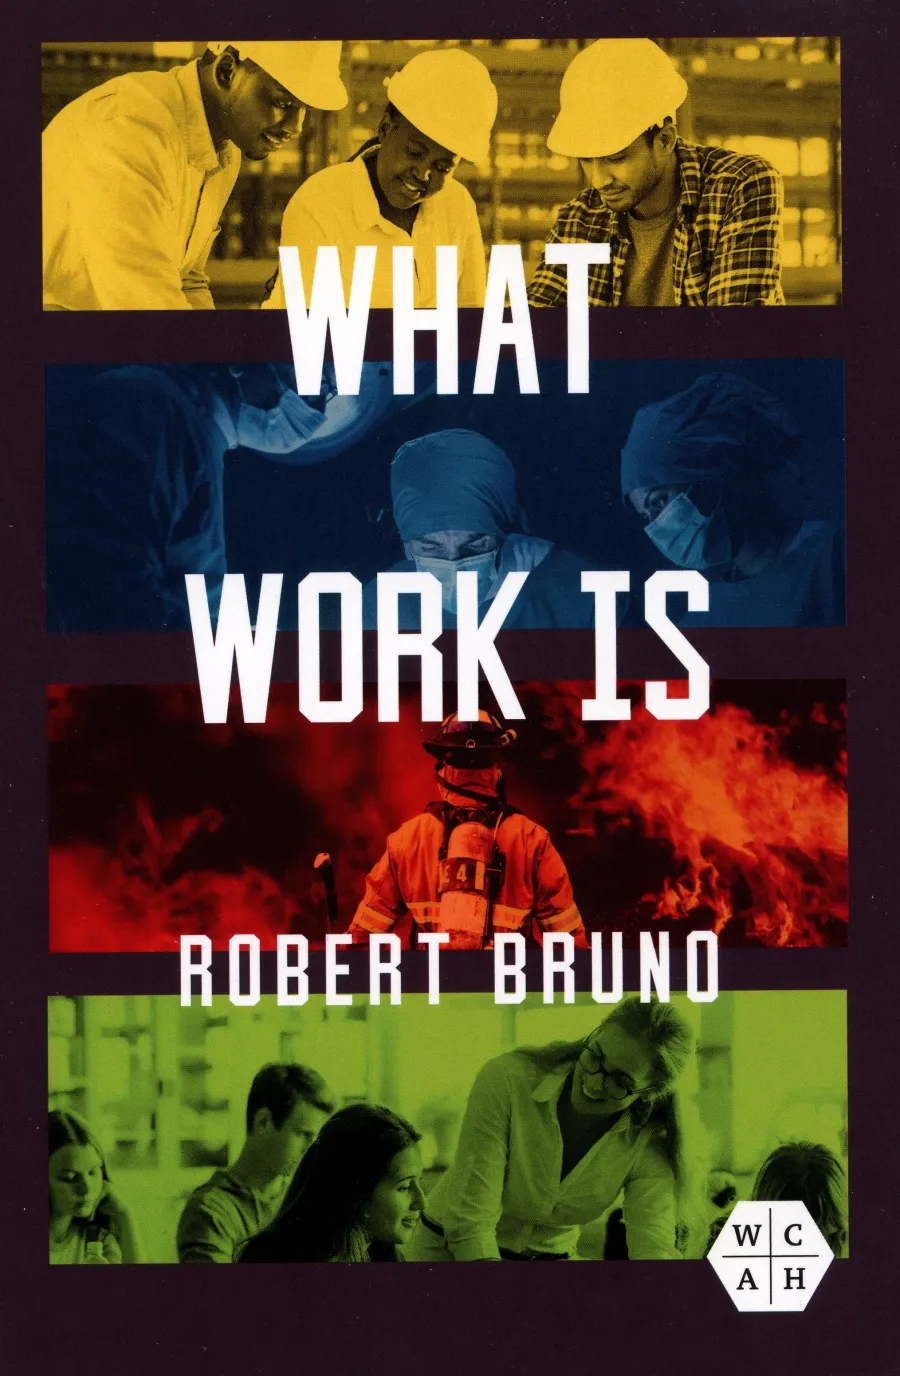 "What Work Is" by Dr. Robert Bruno